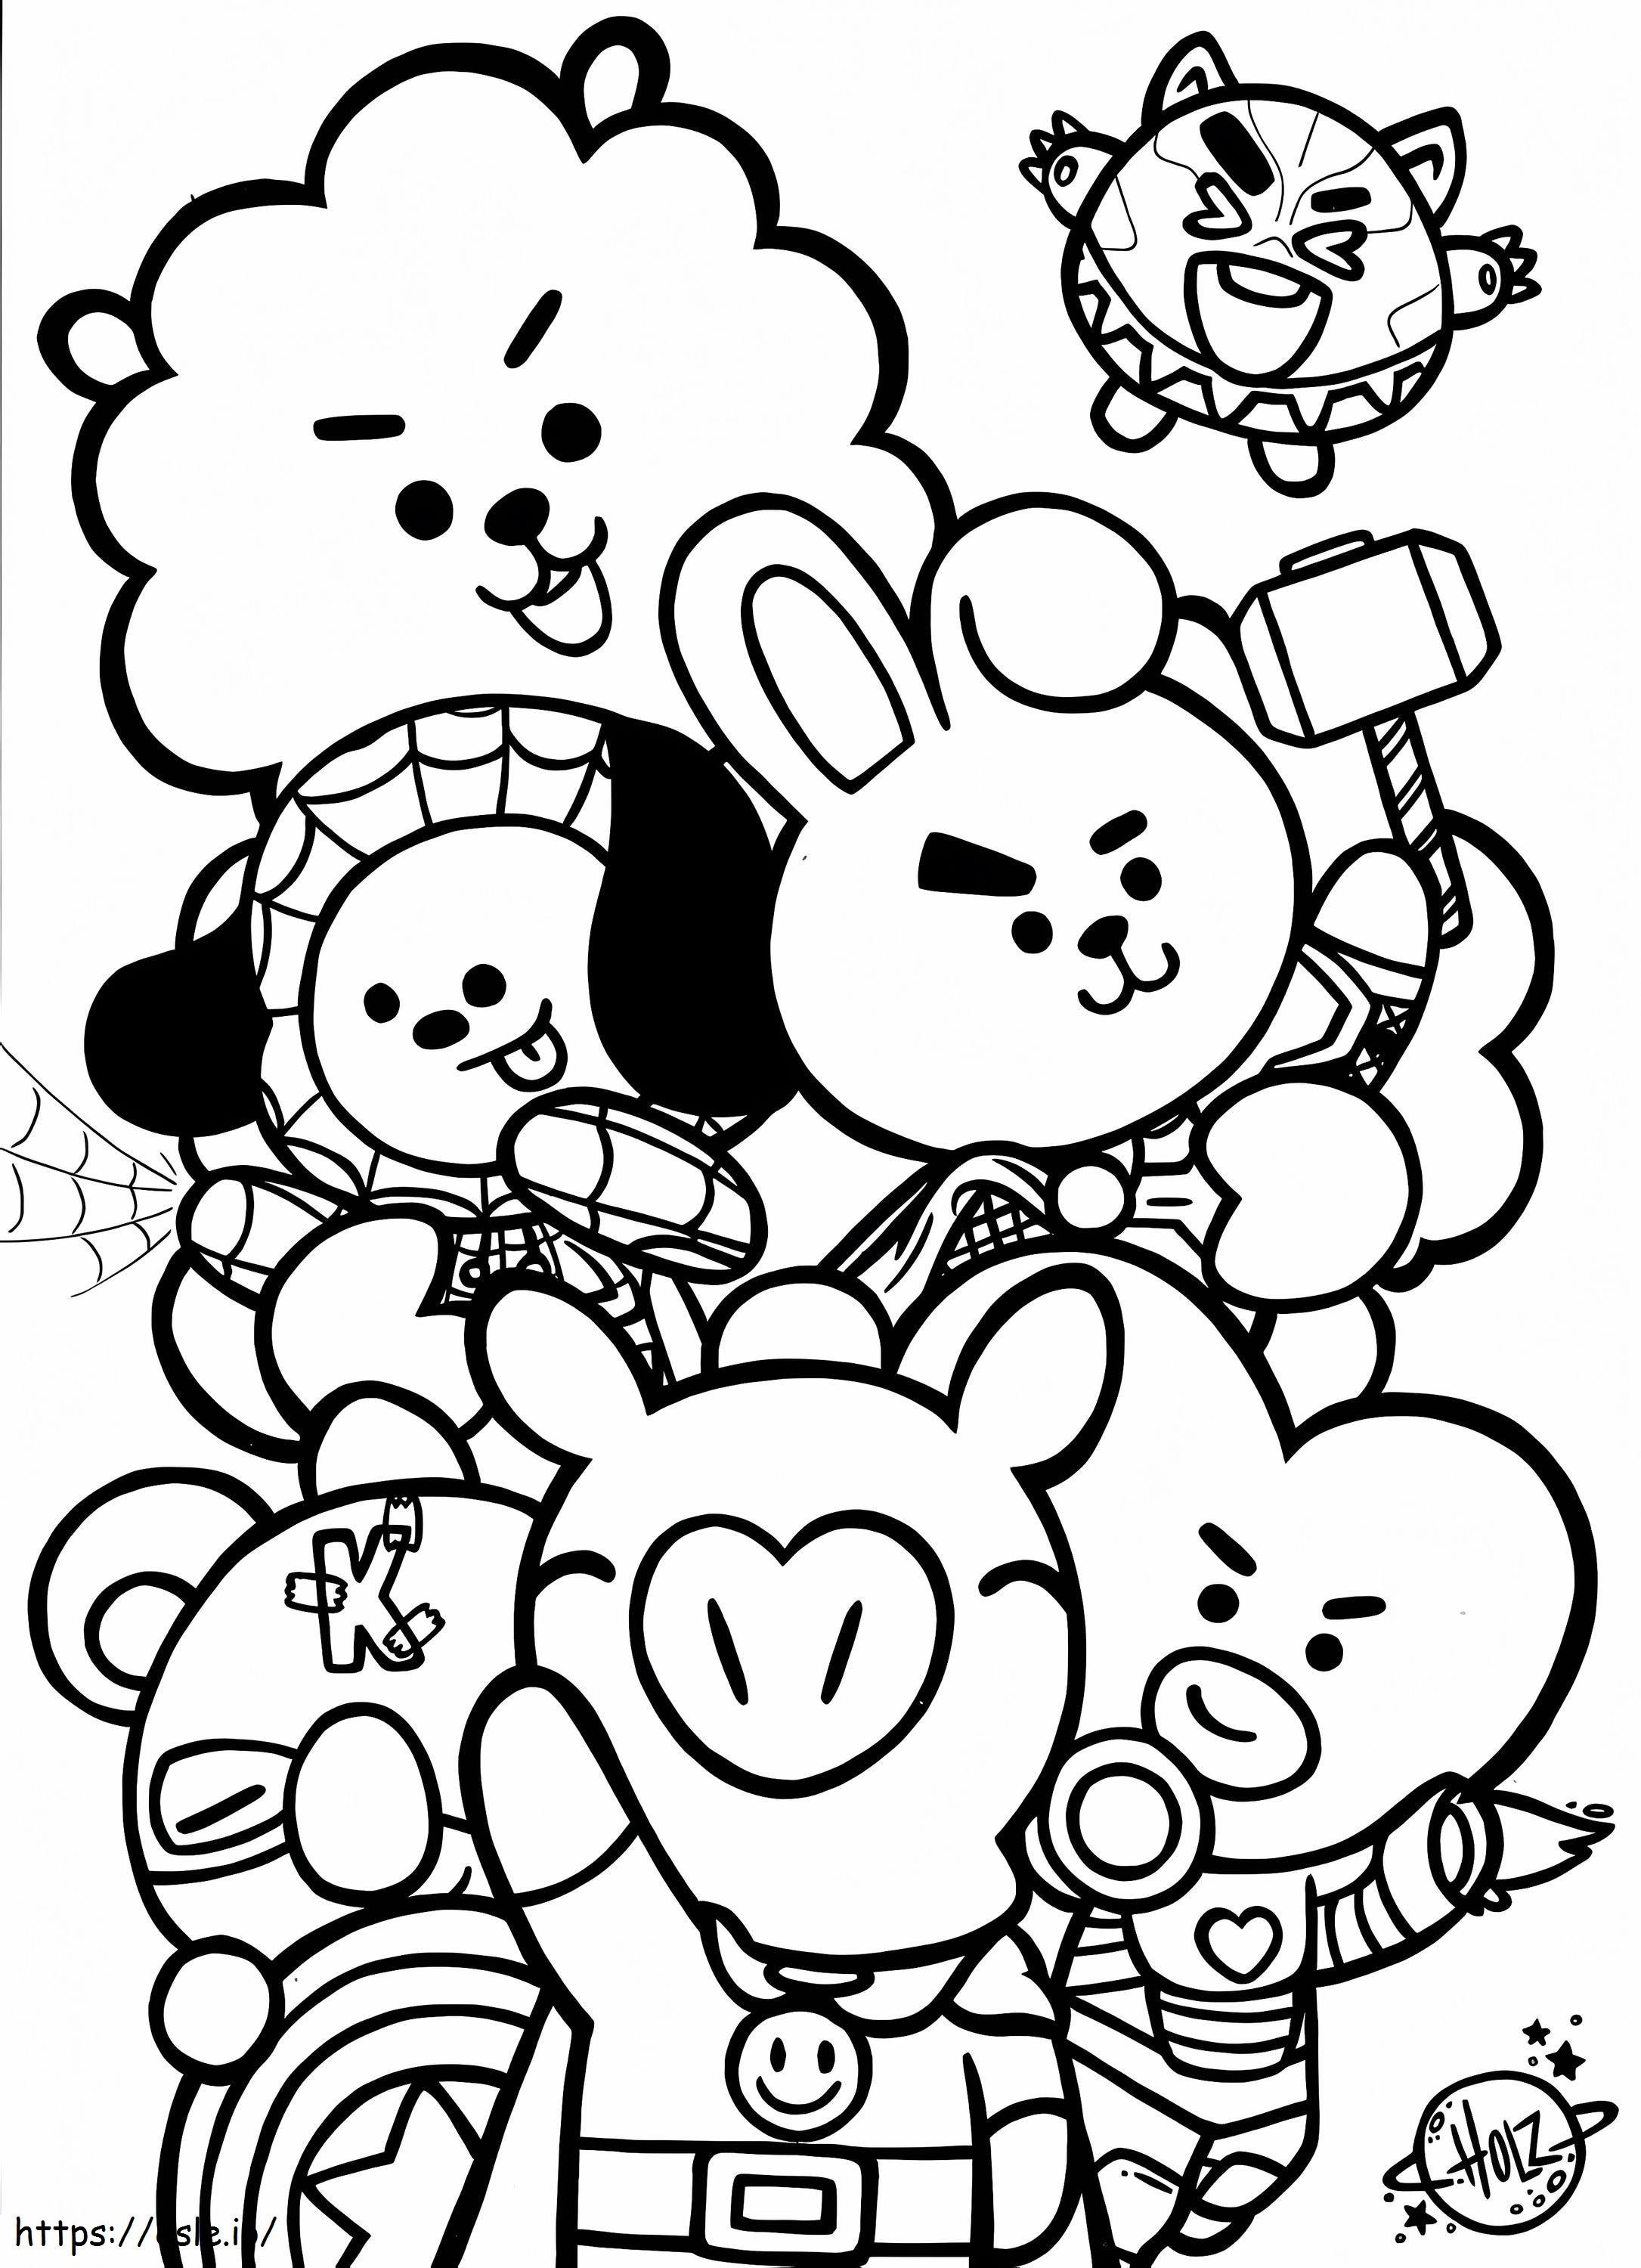 Heroes BT21 coloring page